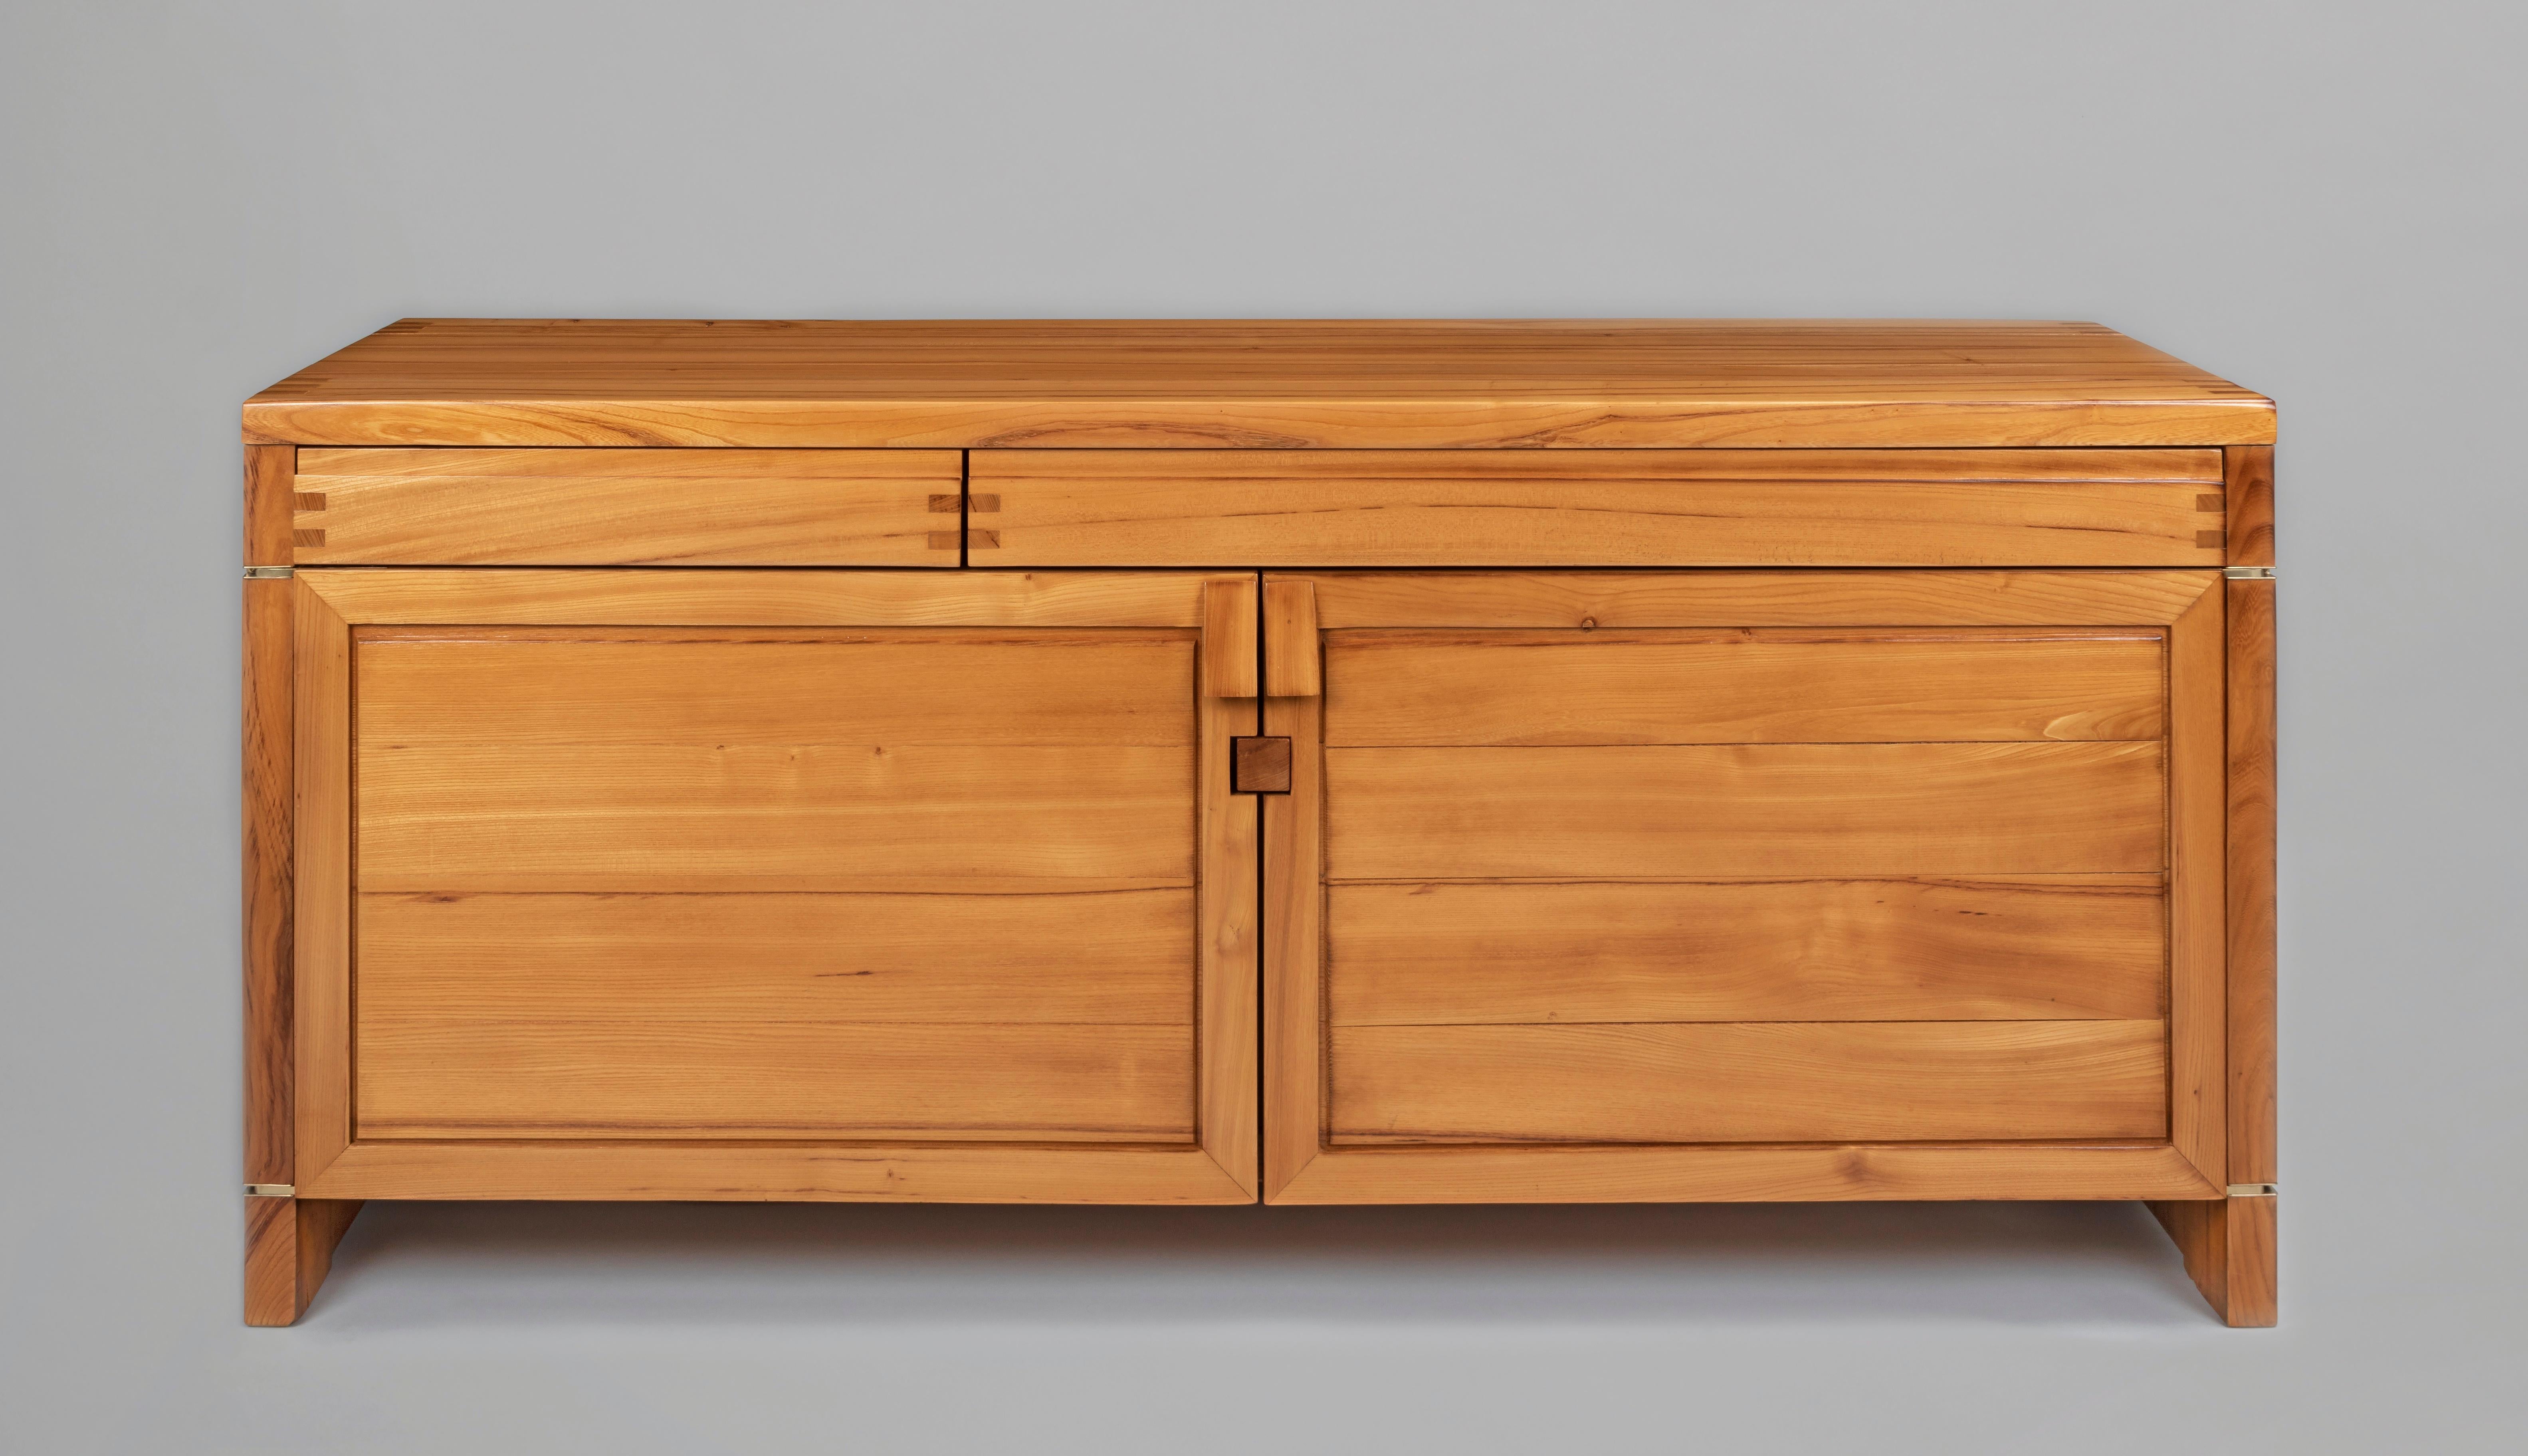 Pierre Chapo (1927–1987)

A superbly crafted, sparely designed, and imposingly scaled two-door sideboard by master artisan Pierre Chapo. In solid elm with brass hinges, asymmetrical frieze drawers, and beautiful exposed joinery, this cabinet is